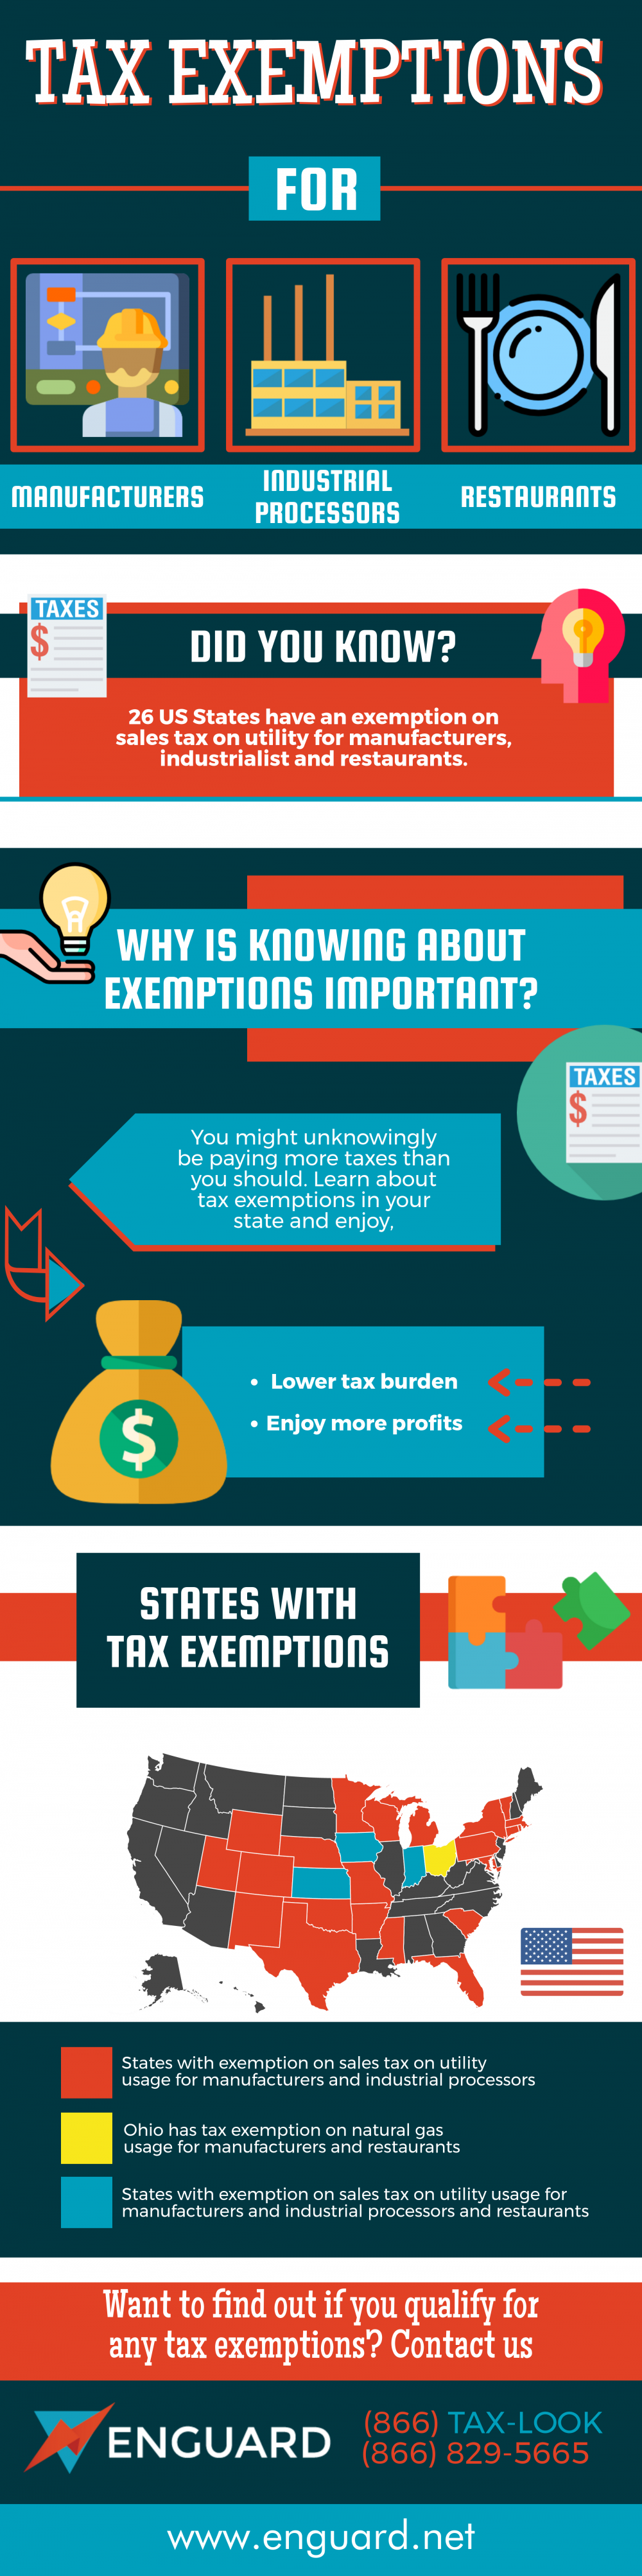 tax exemptions